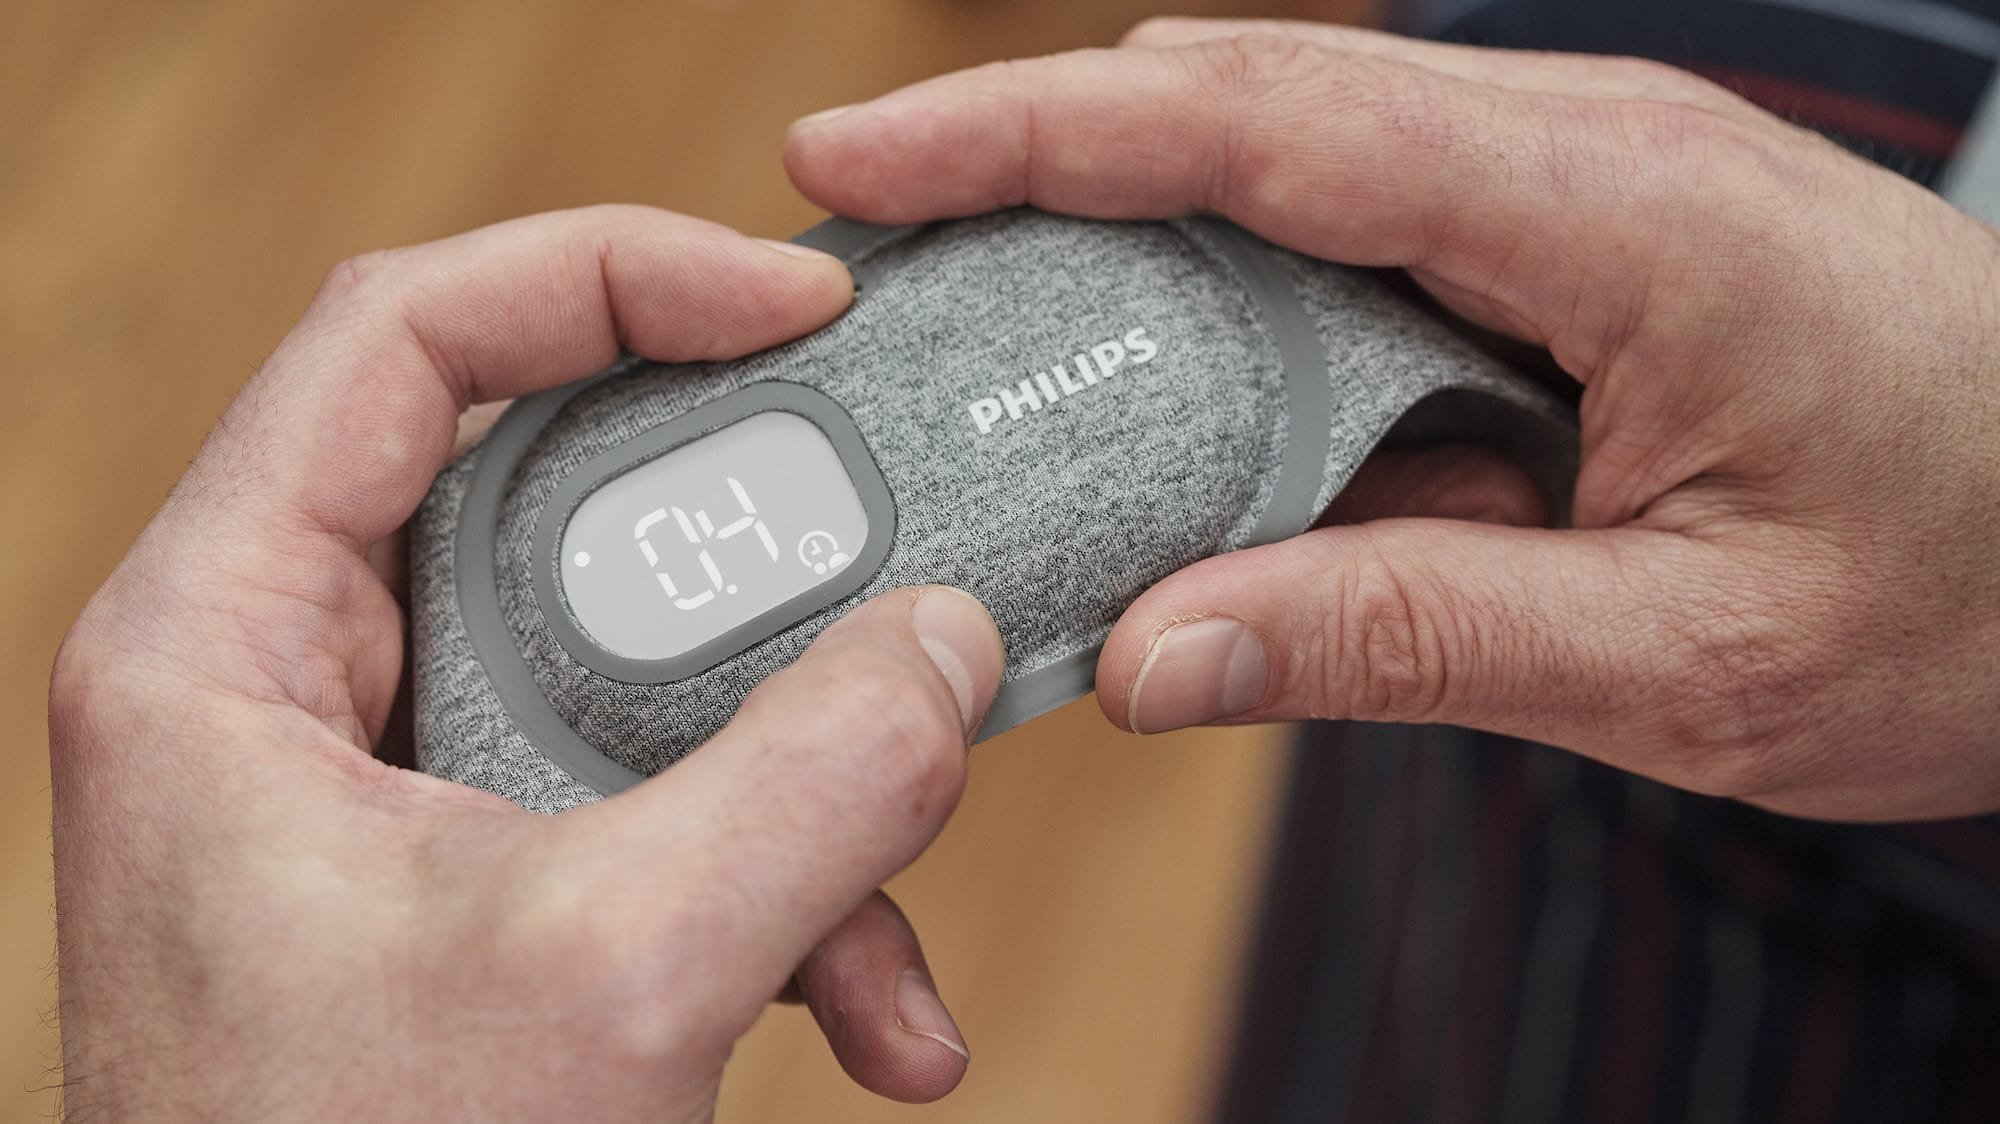 Philips SmartSleep Snoring Relief Band alerts you before your snoring starts